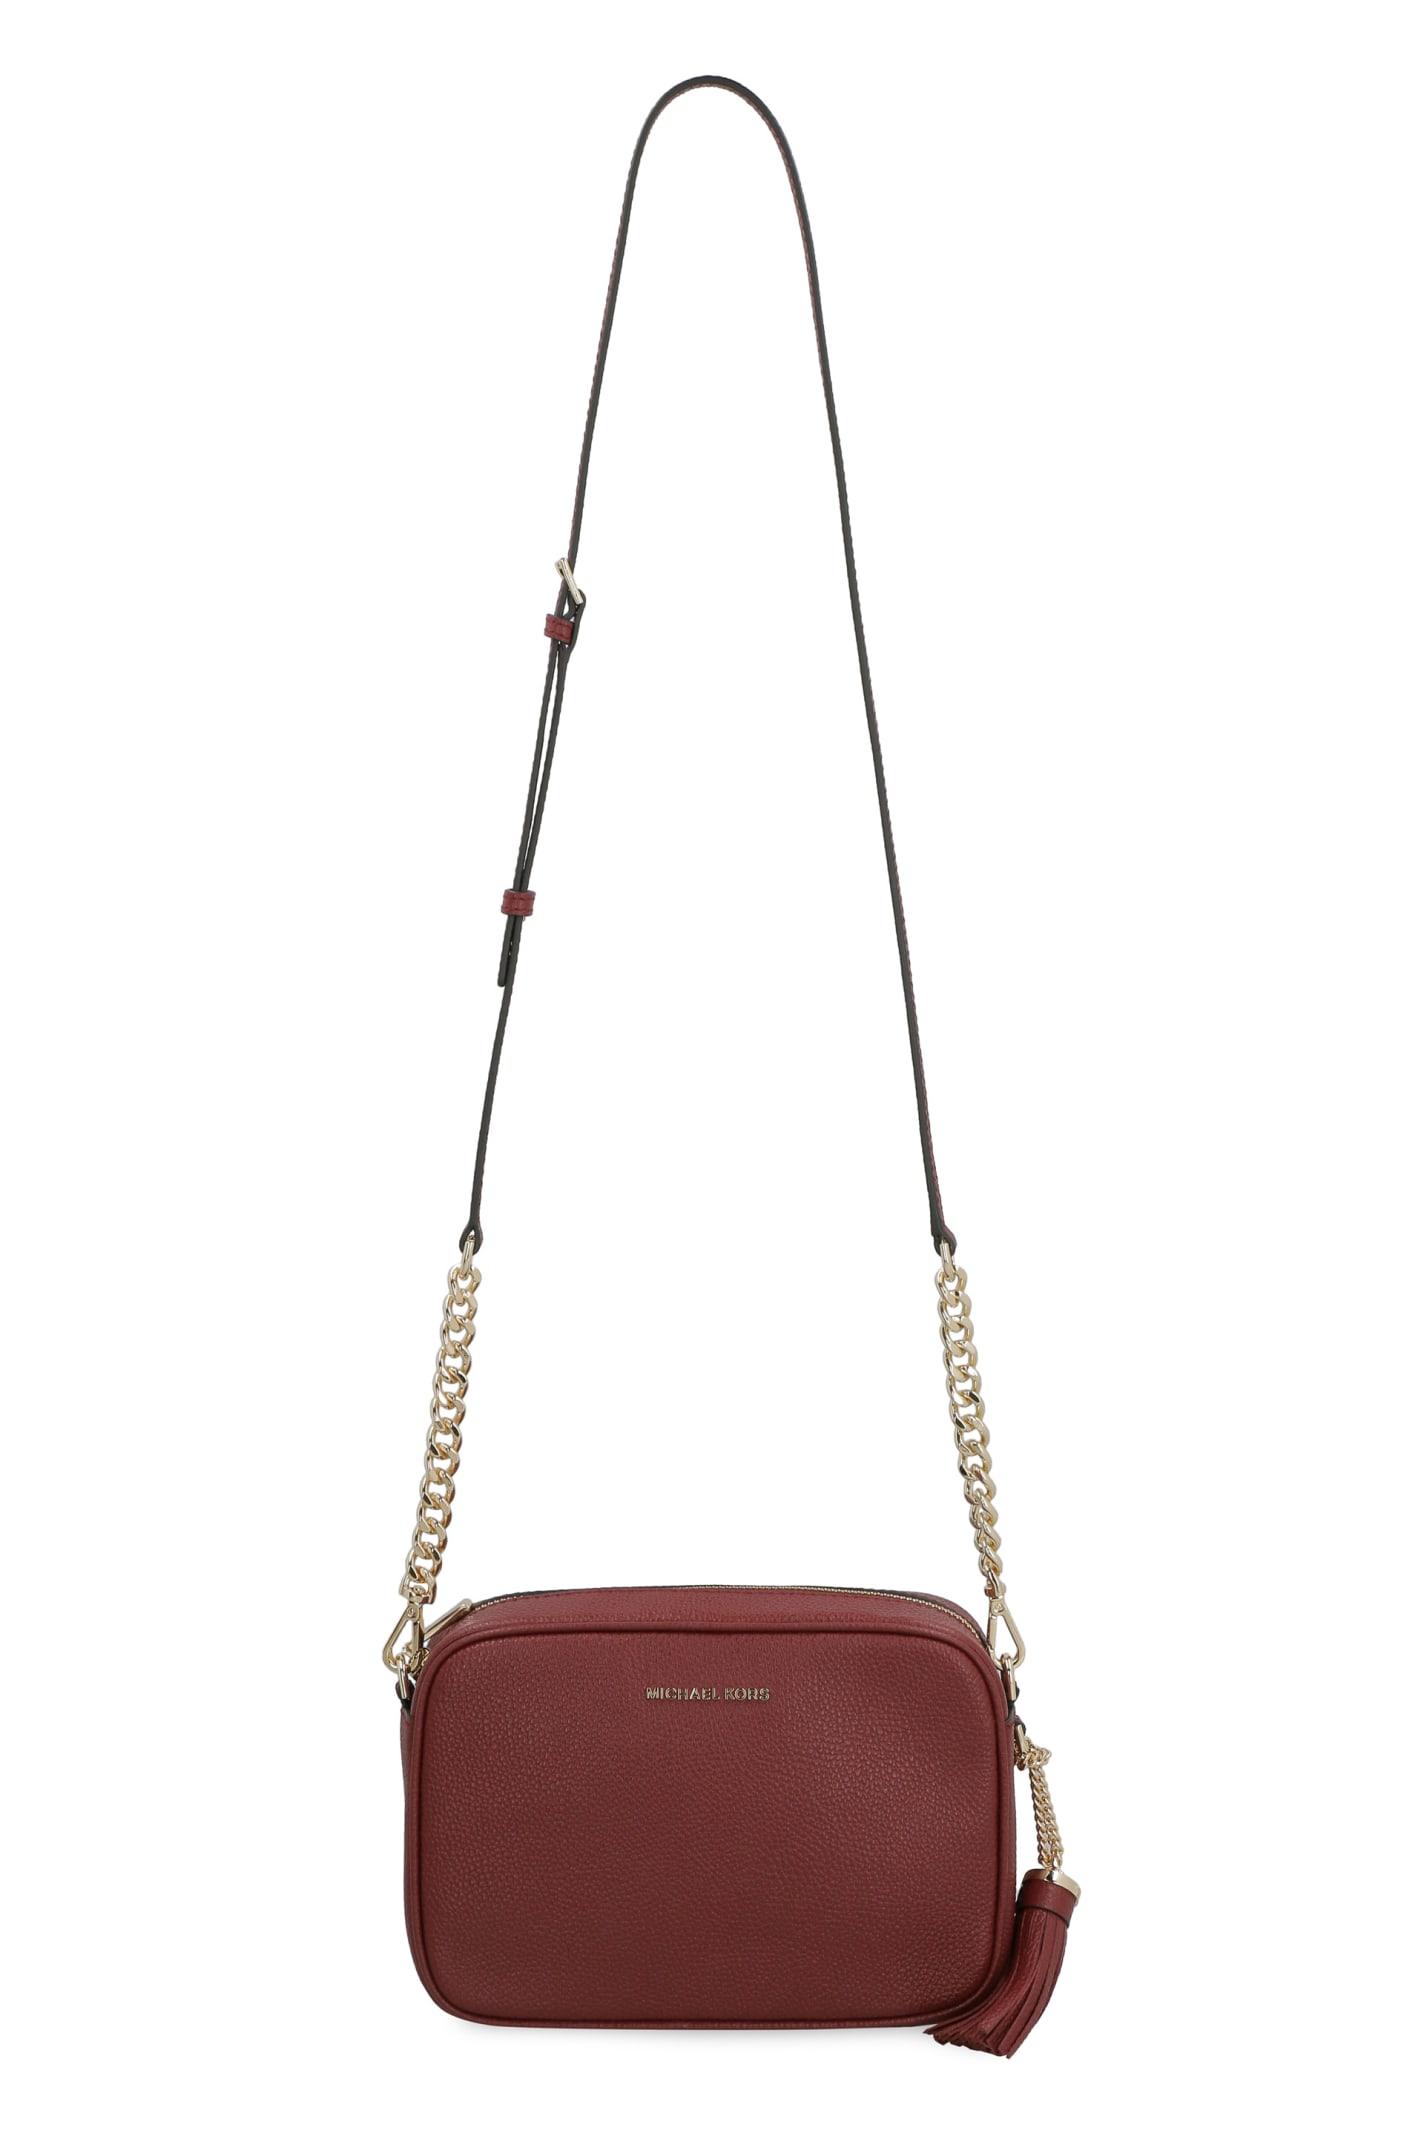 Michael Kors Ginny Leather Crossbody Bag in Red | Lyst